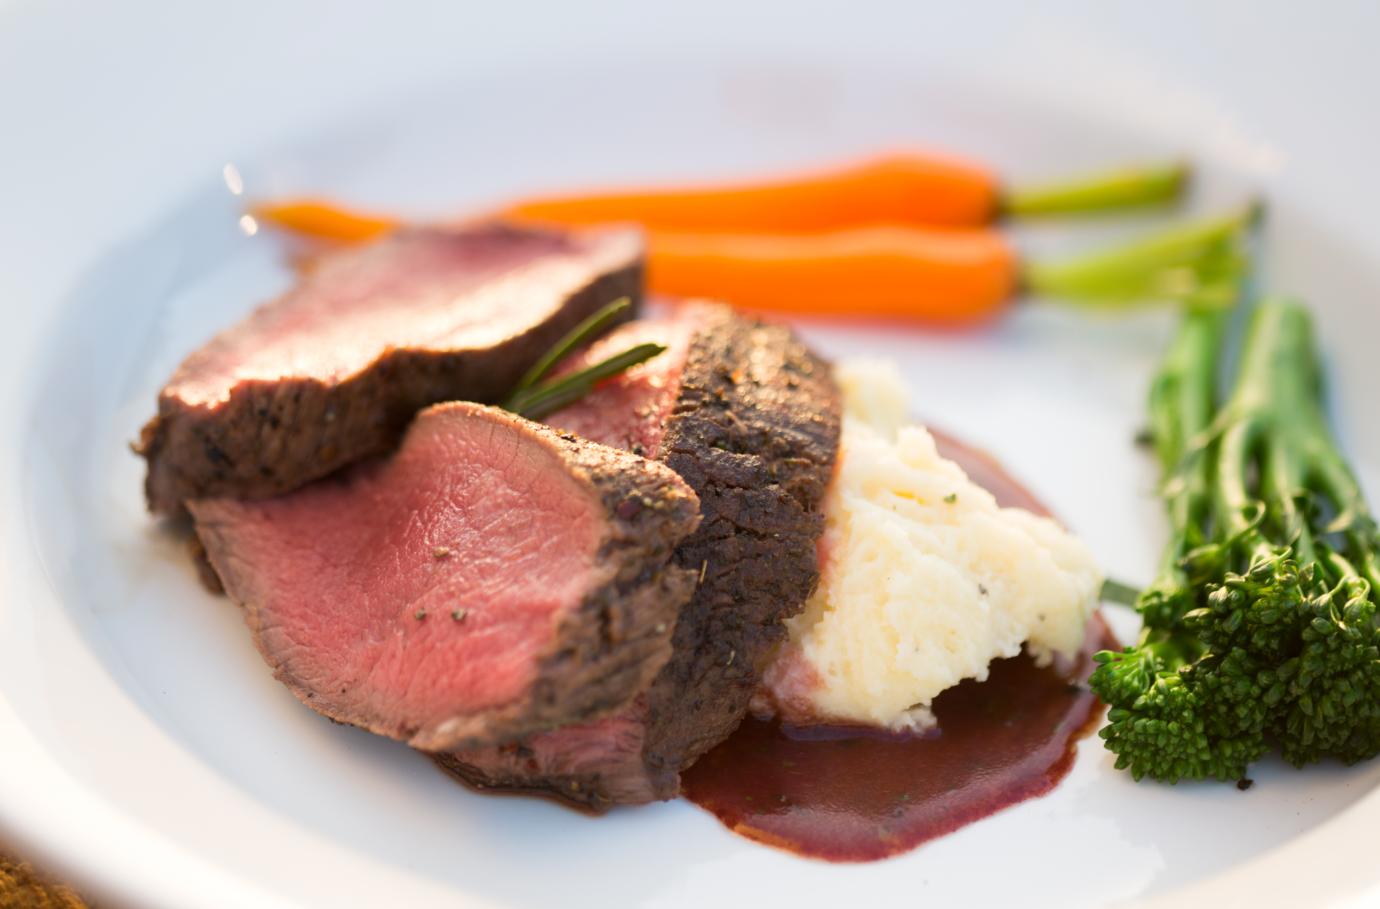  Smooth and velvety chocolate wine sauce complements the tender beef.